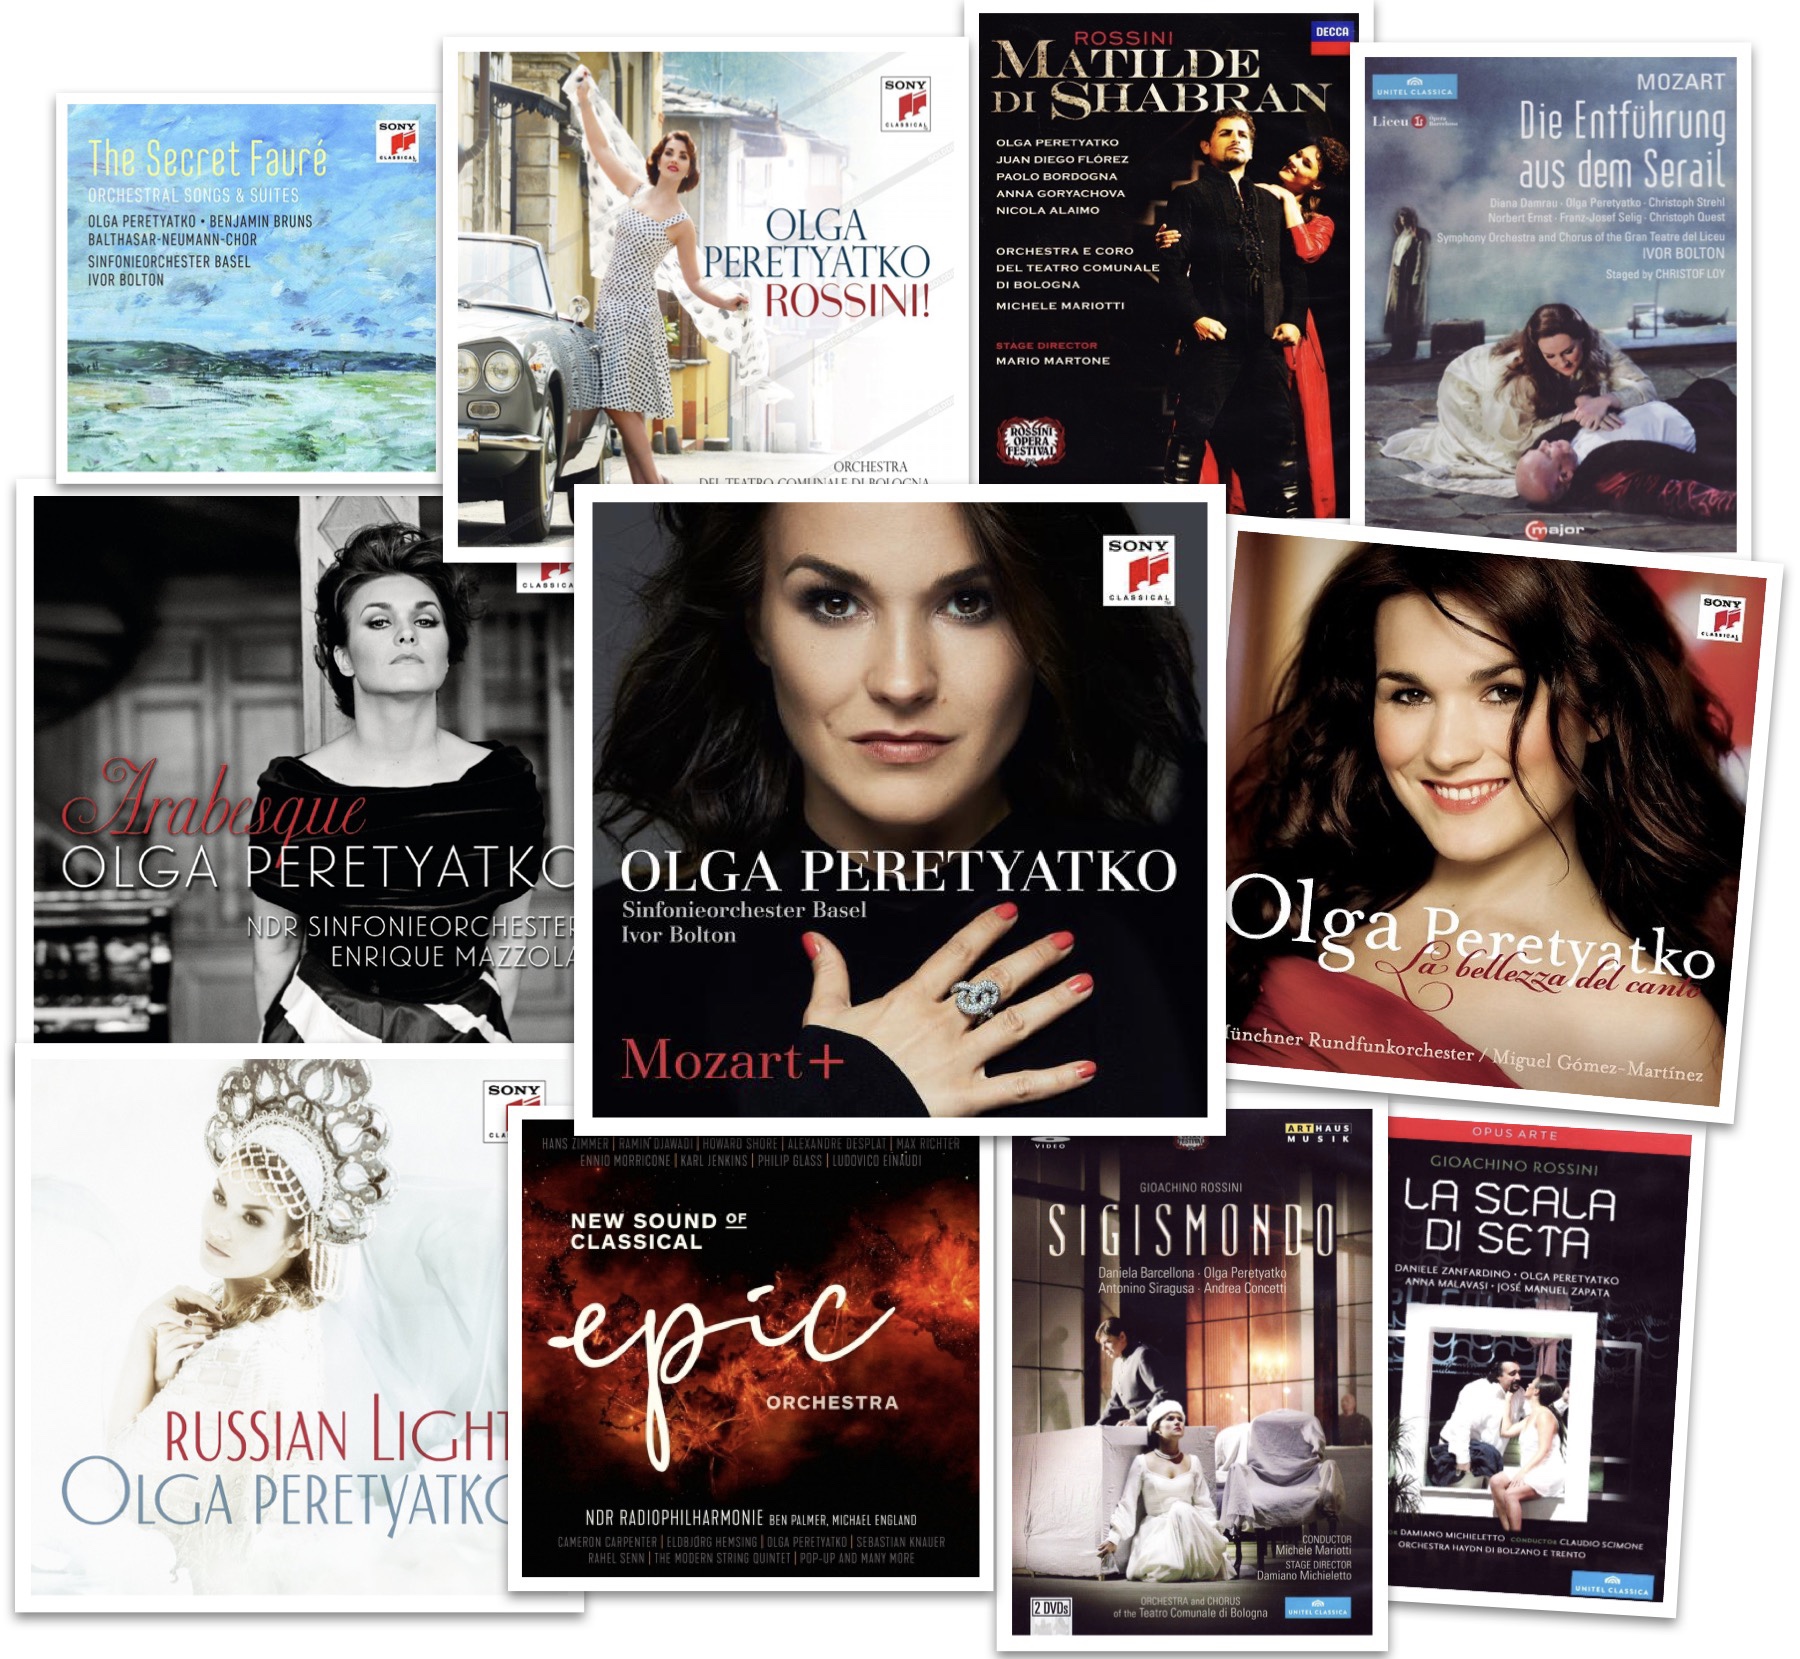 Find all albums of Olga on iTunes, Spotify, Google Play